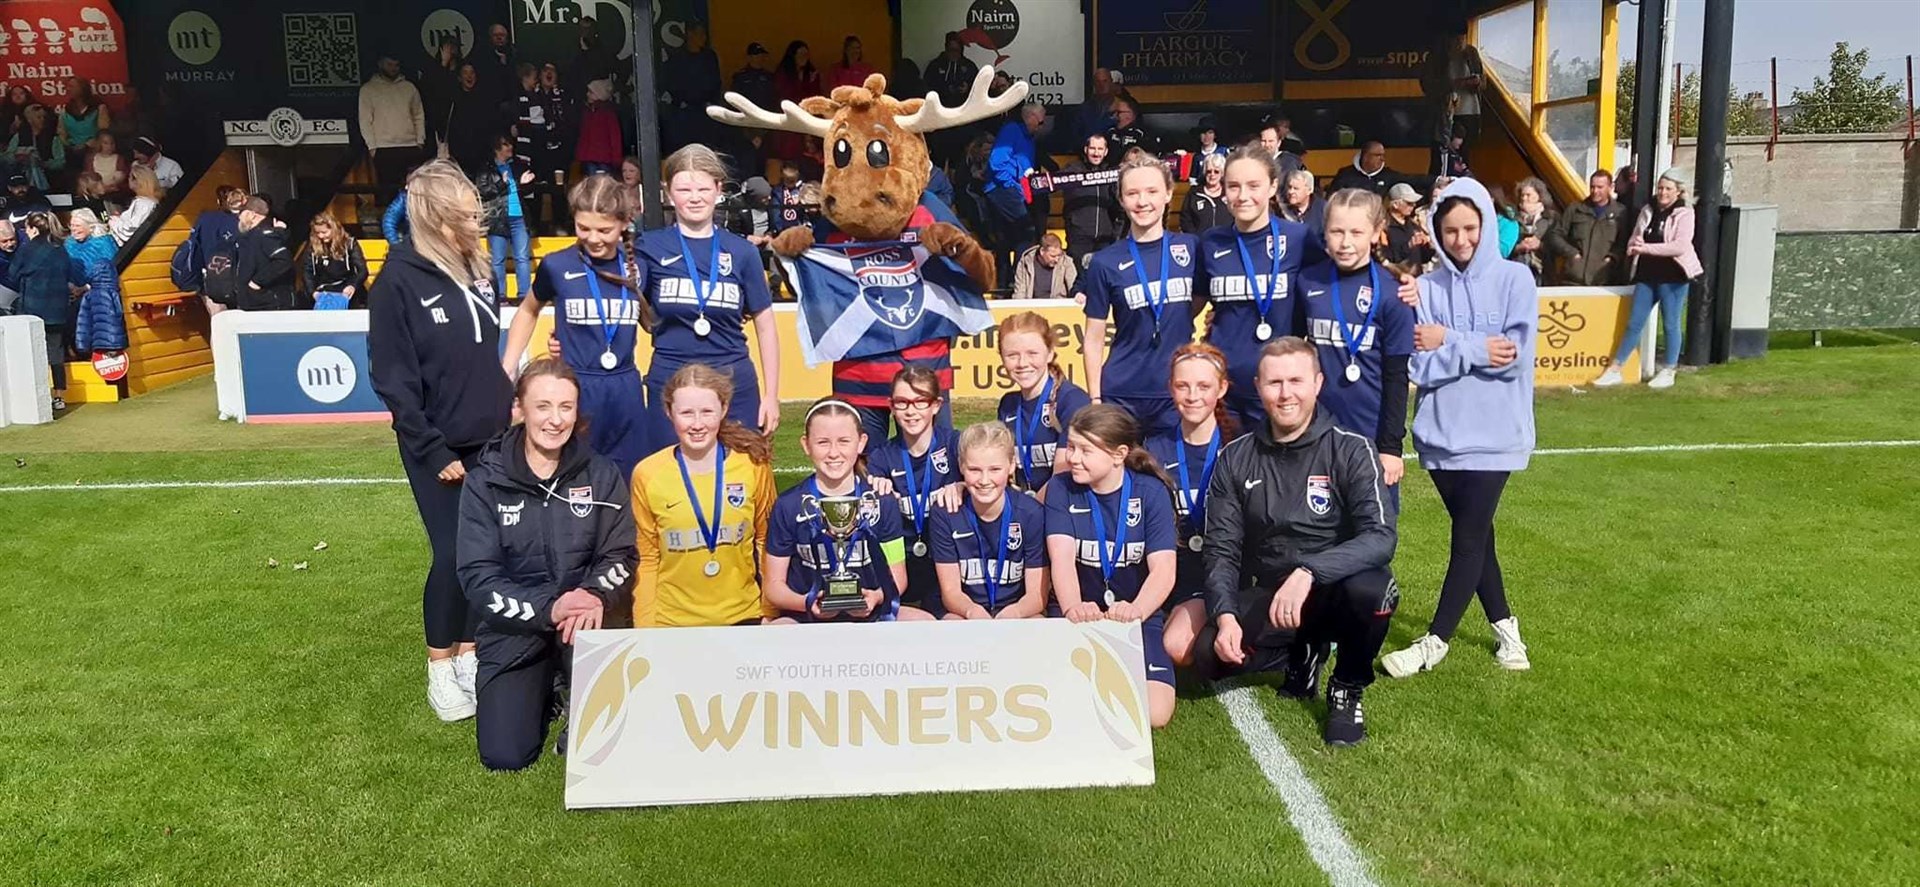 Ross County's under-14 girls won the Highland League Cup after a 5-0 win against Nairn St Ninian.